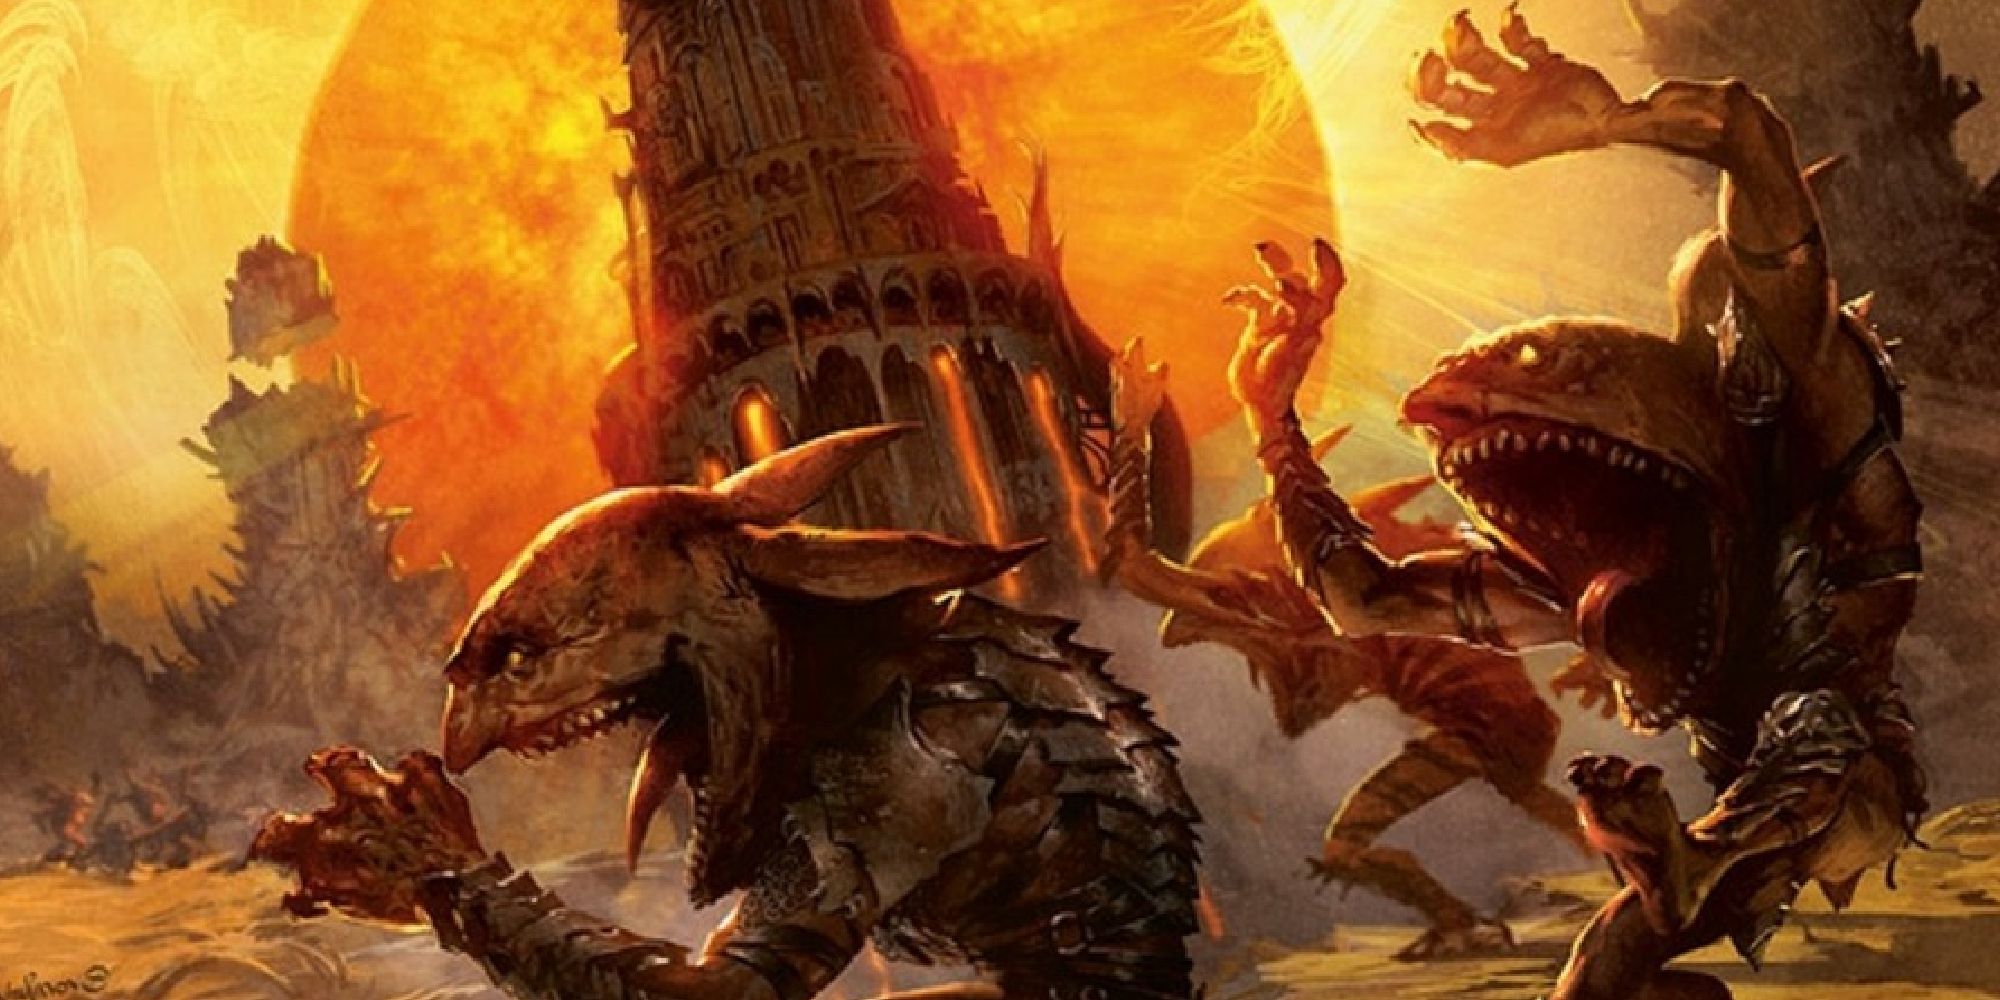 Image of the Red Sun's Zenith card in Magic: The Gathering, with art by Svetlin Velinov